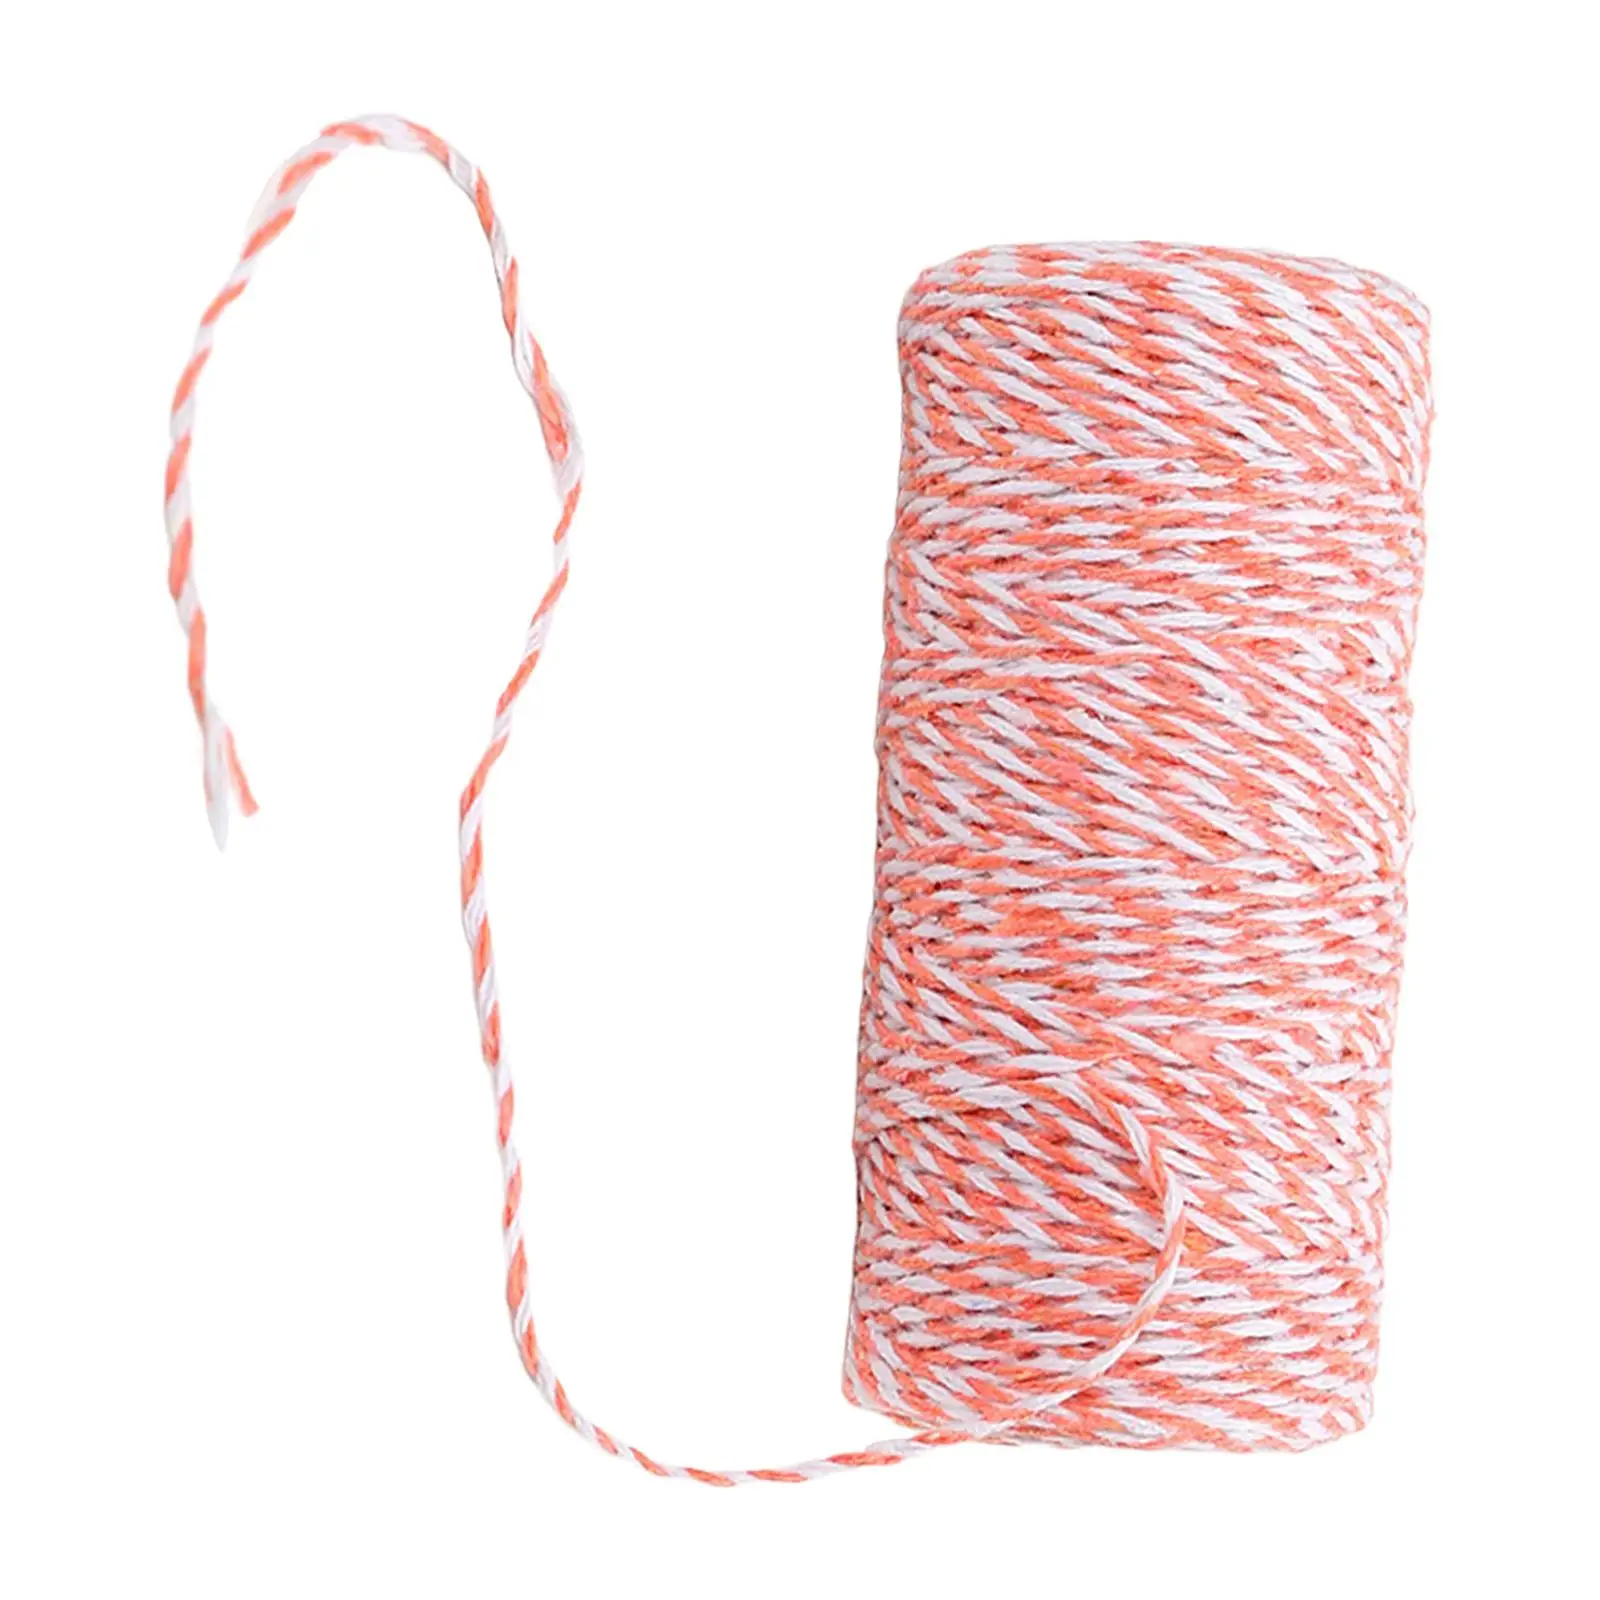 2mm Macrame Cord Rope Festive Twine Packing String for Home Sewing Embellishments Decor